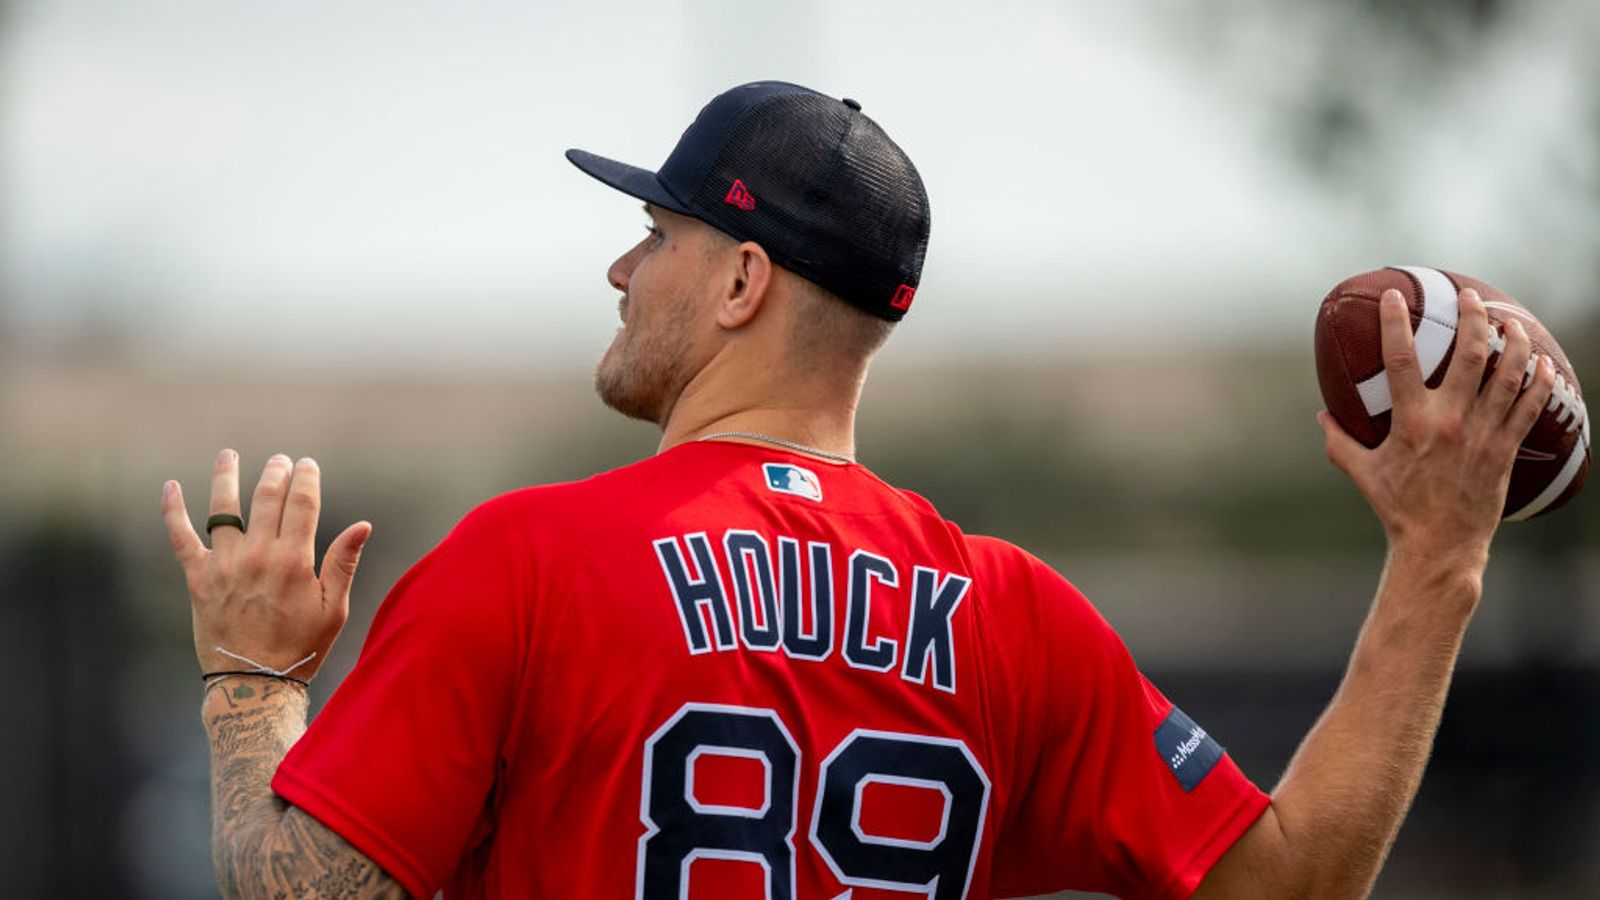 Red Sox' Tanner Houck will have season-ending back surgery, expected to be  ready for spring training in 2023